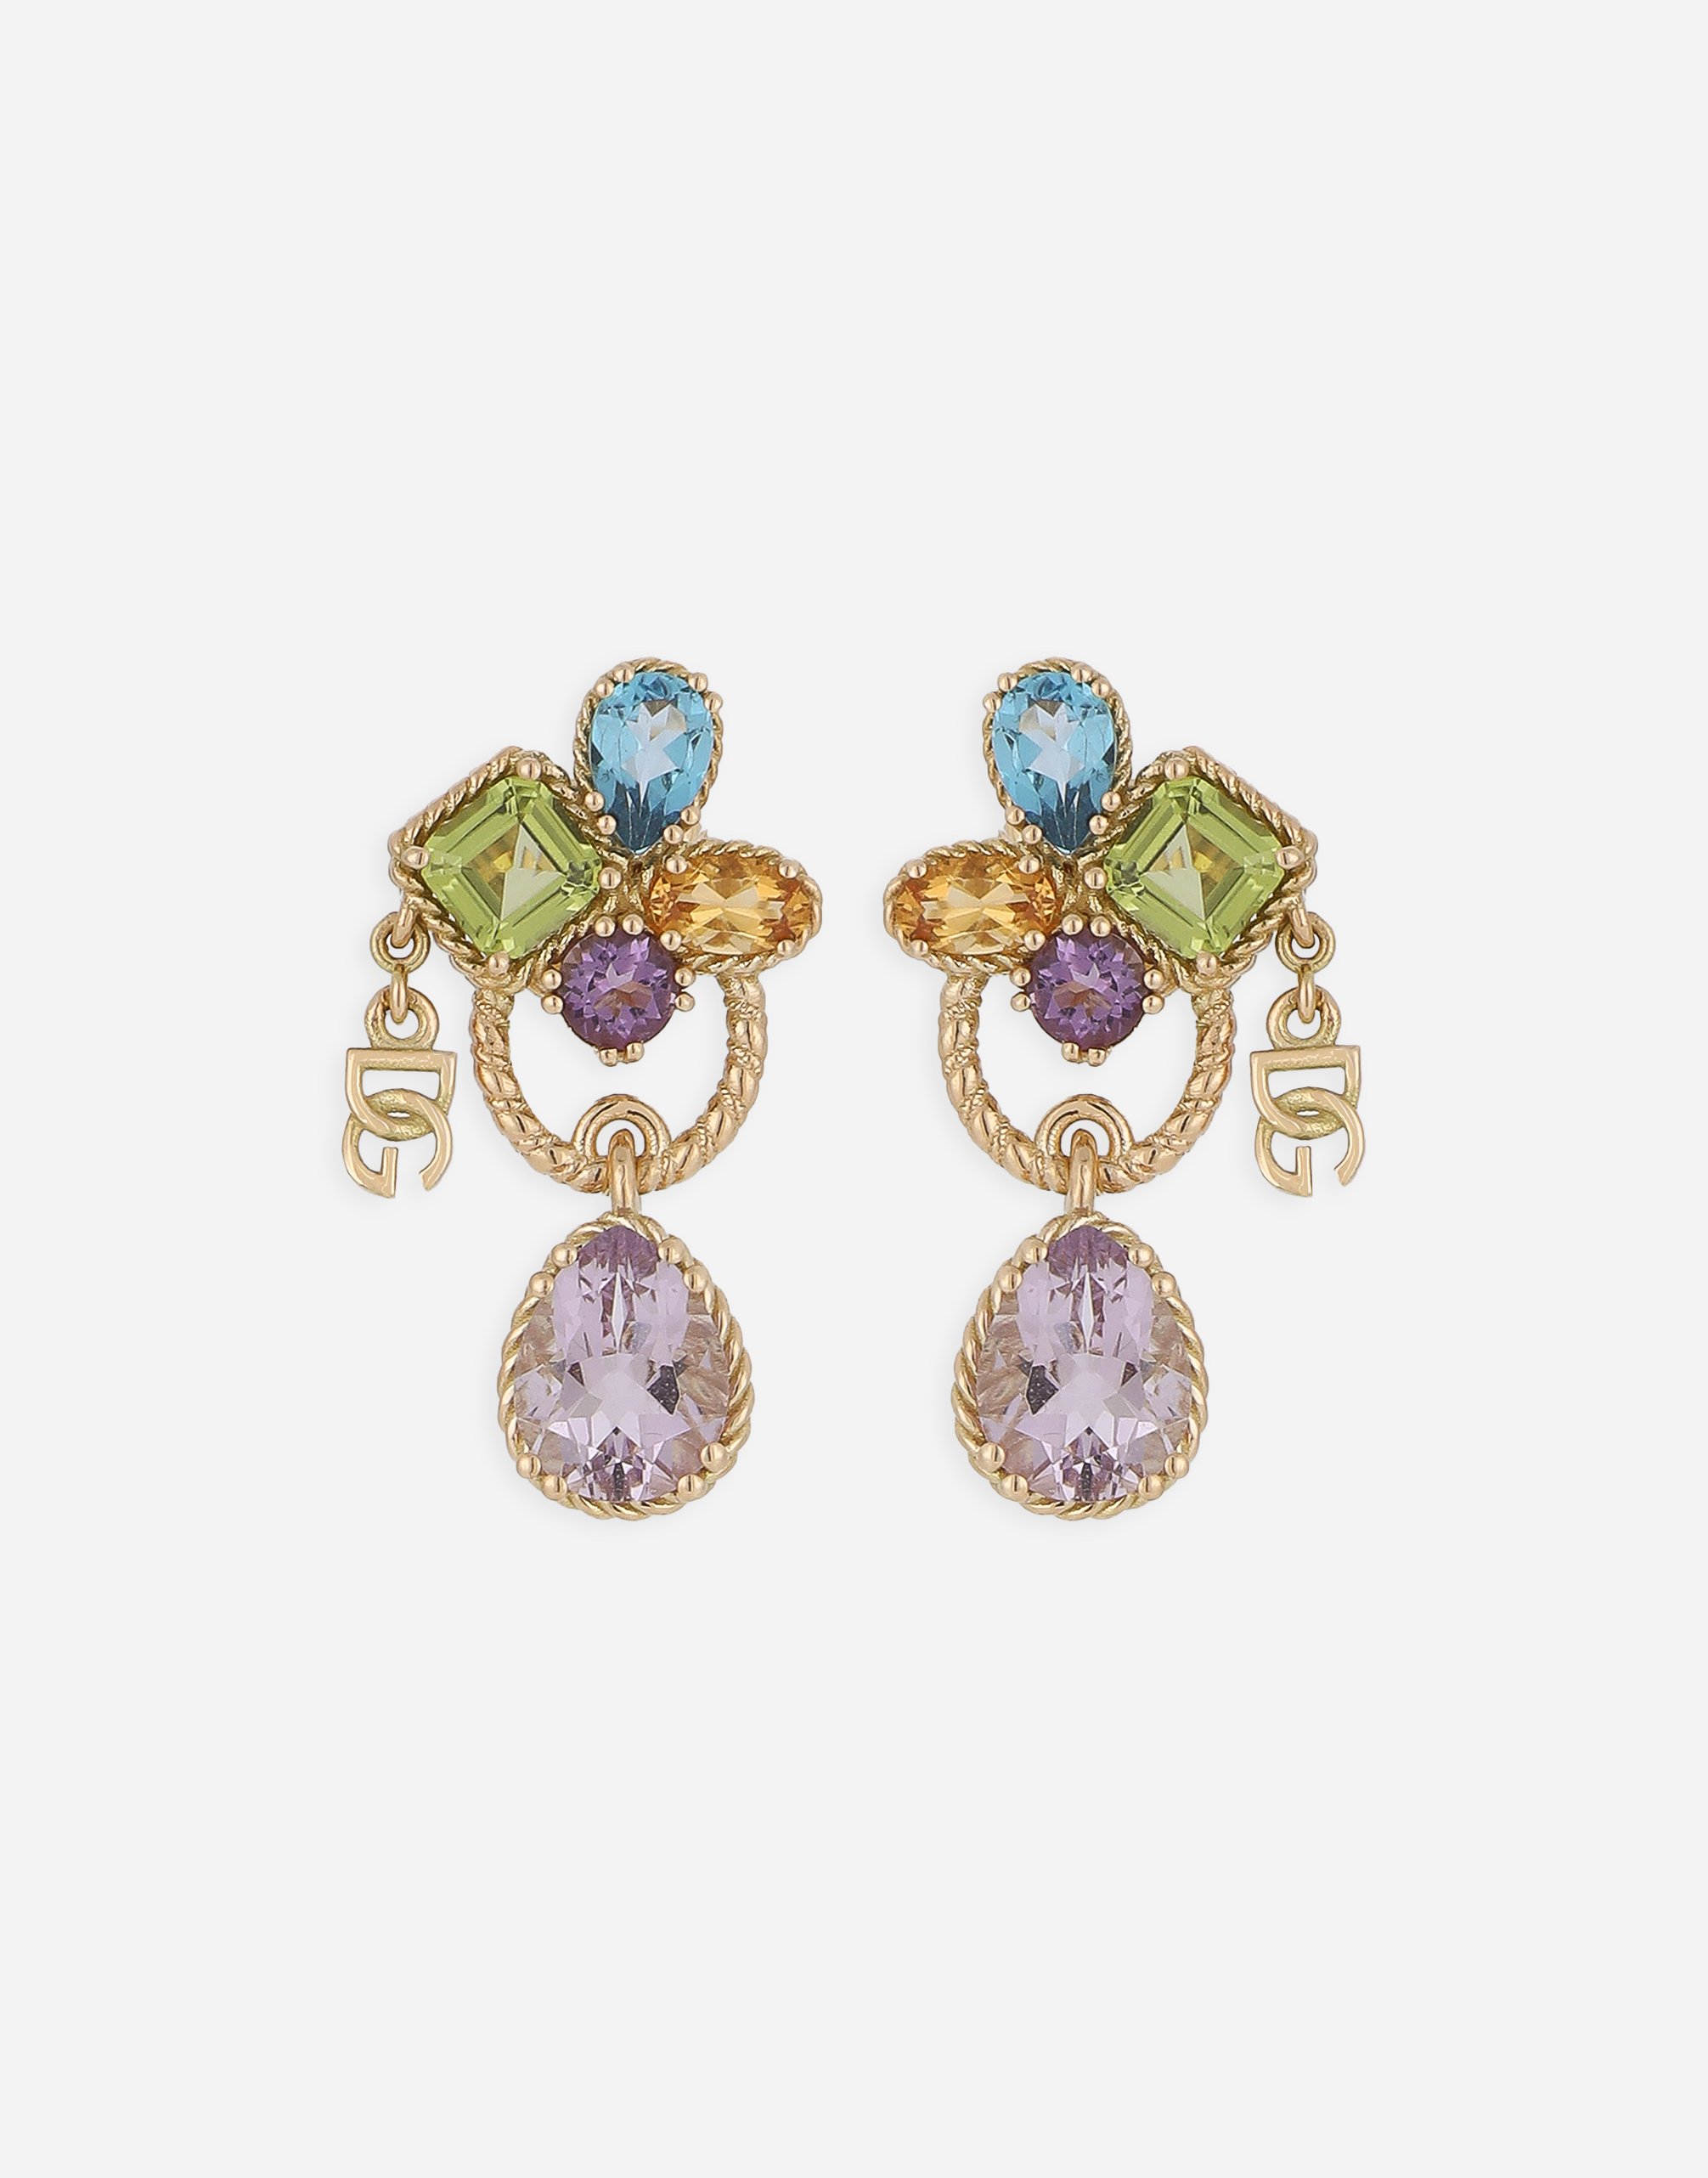 18kt yellow gold pierced earrings withmulticolors gemstones in Yellow Gold